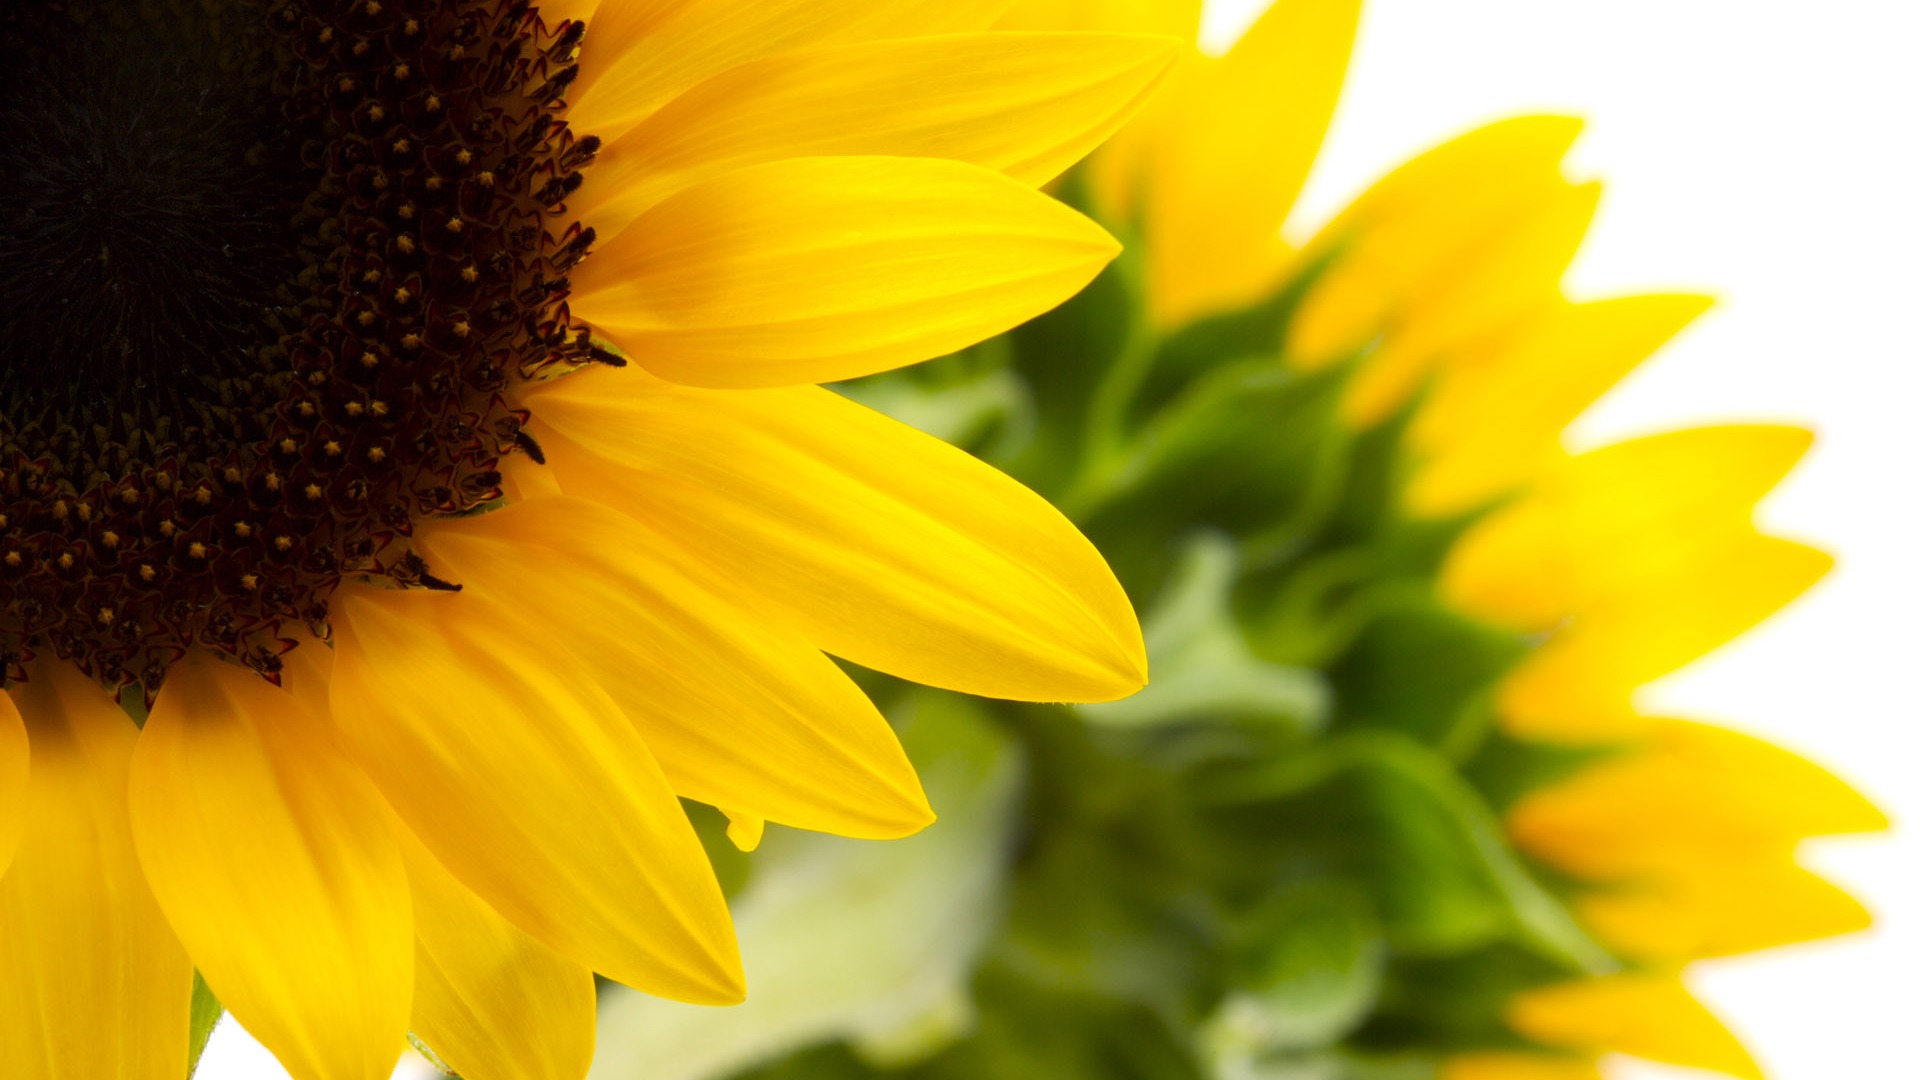 Sunny sunflower photo HD Wallpapers #26 - 1920x1080